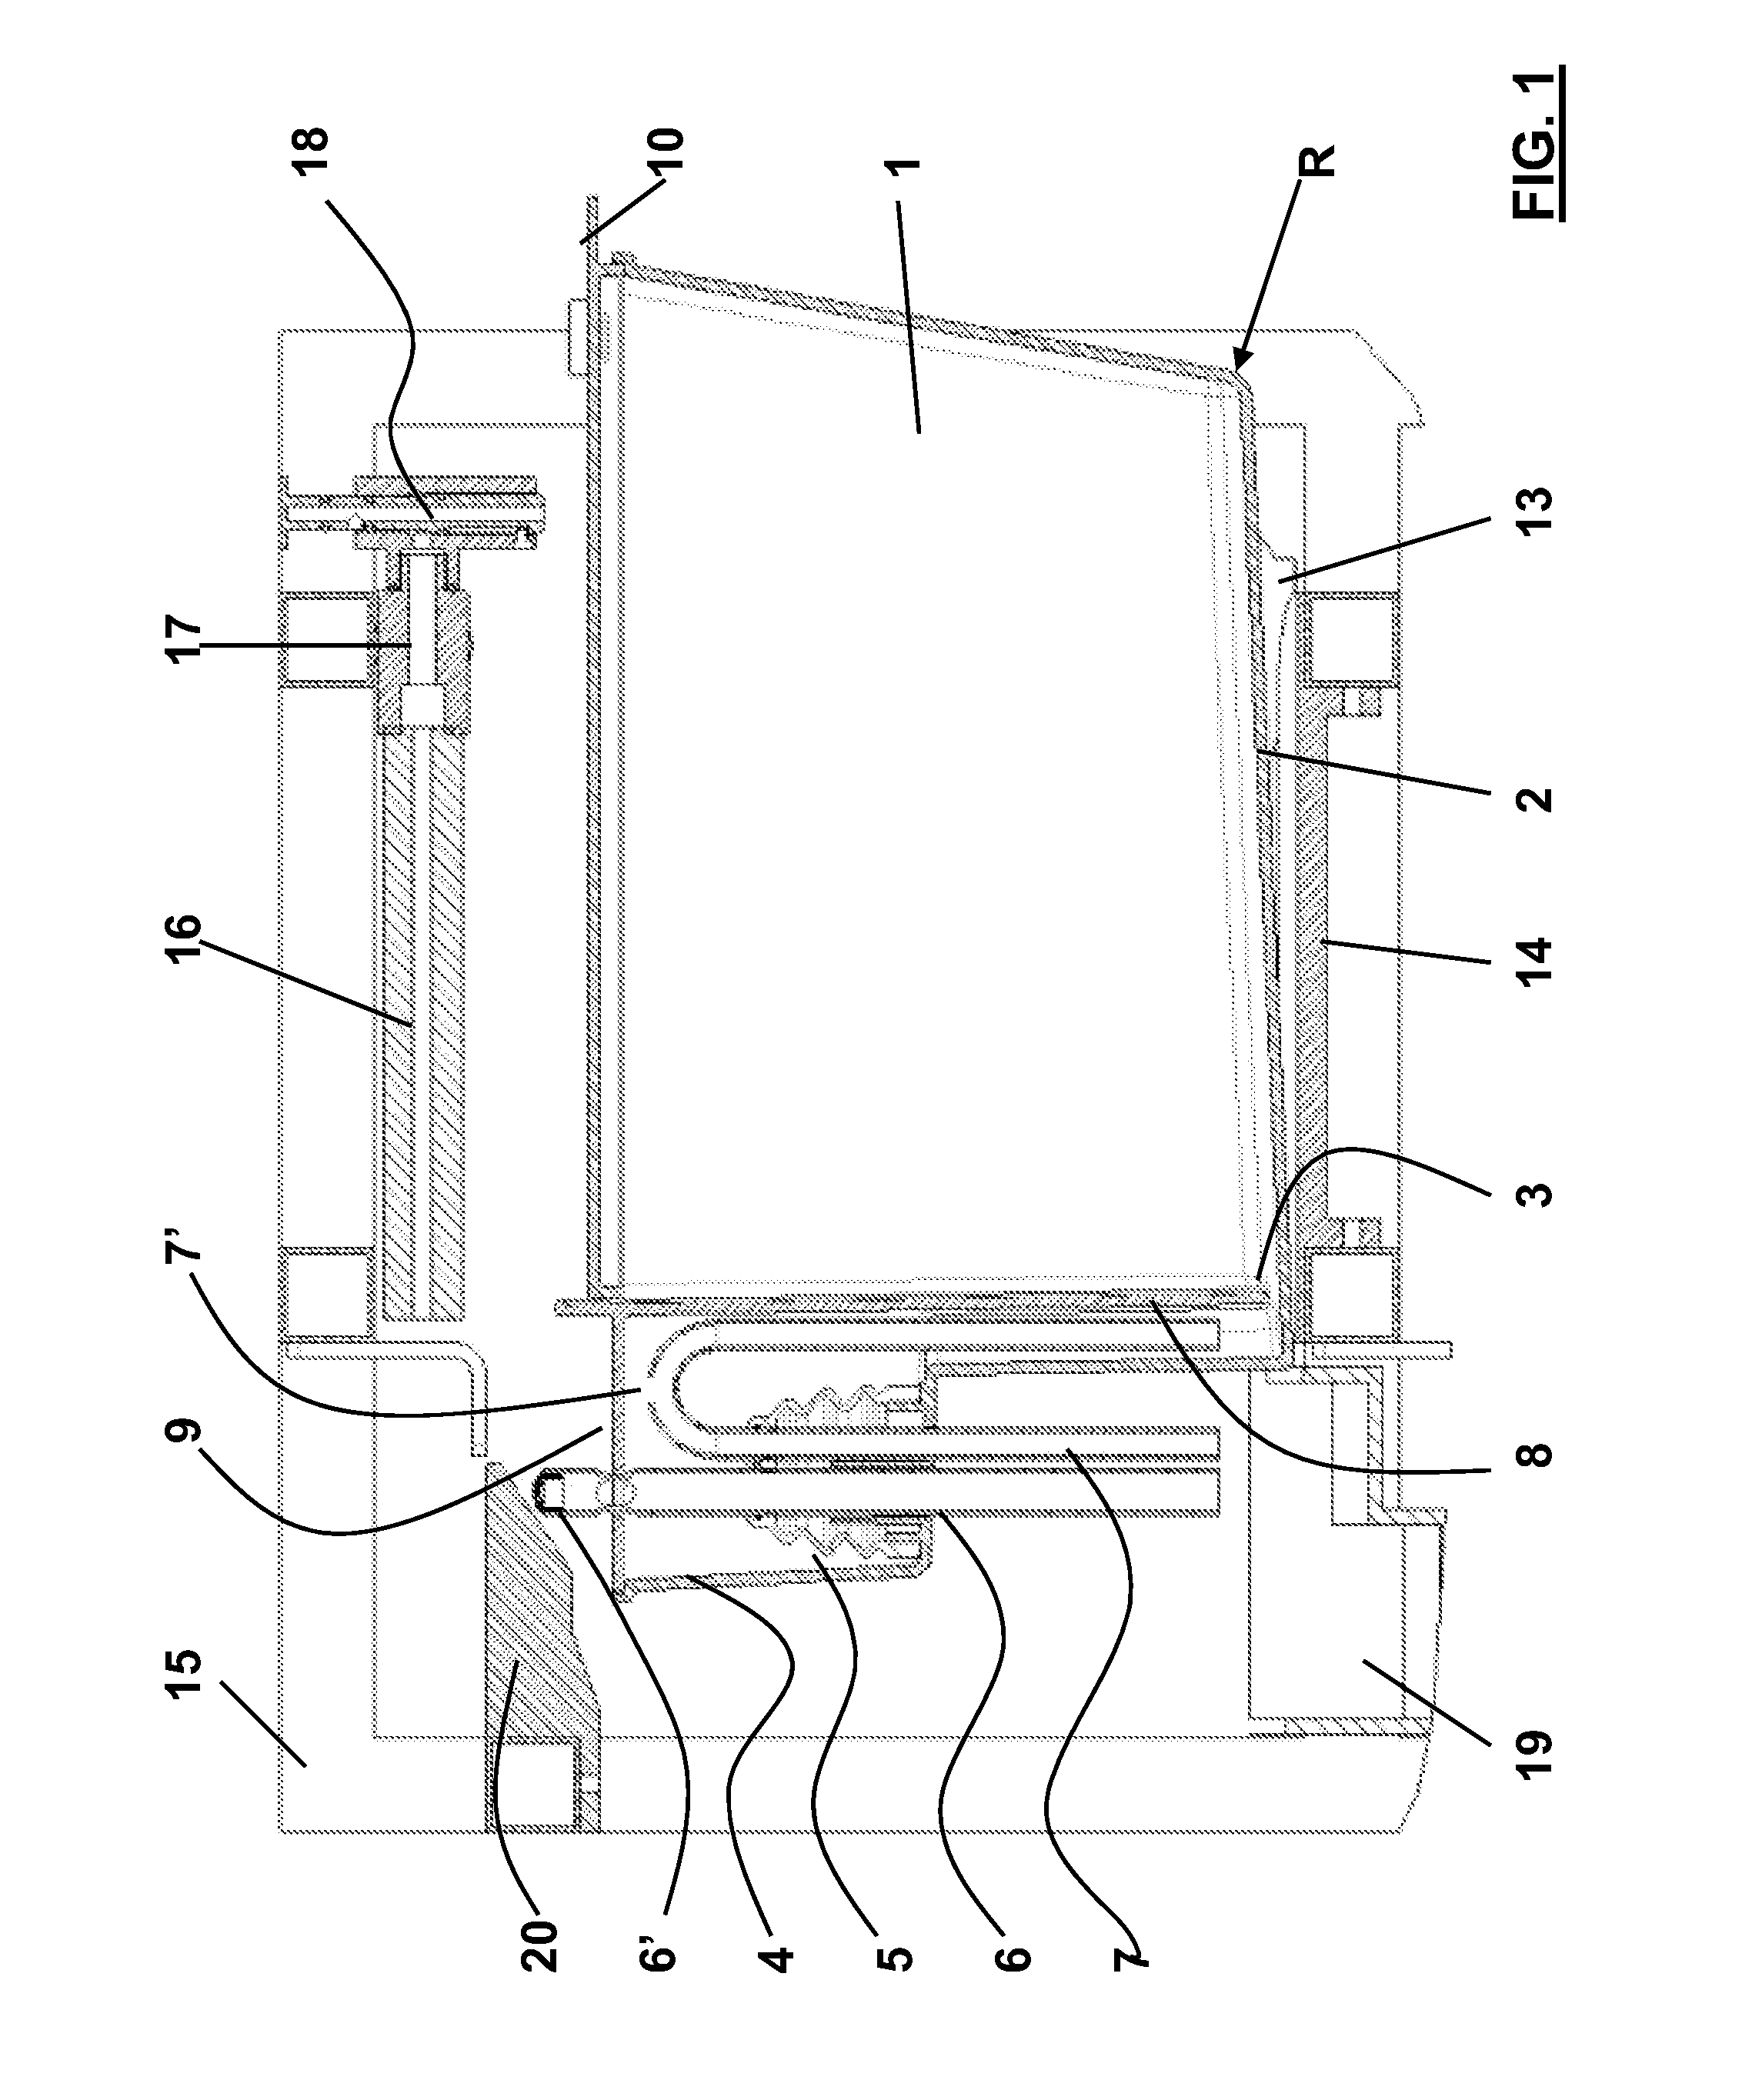 Basin capable of containing aquatic animals, especially experimental animals, and relating housing system